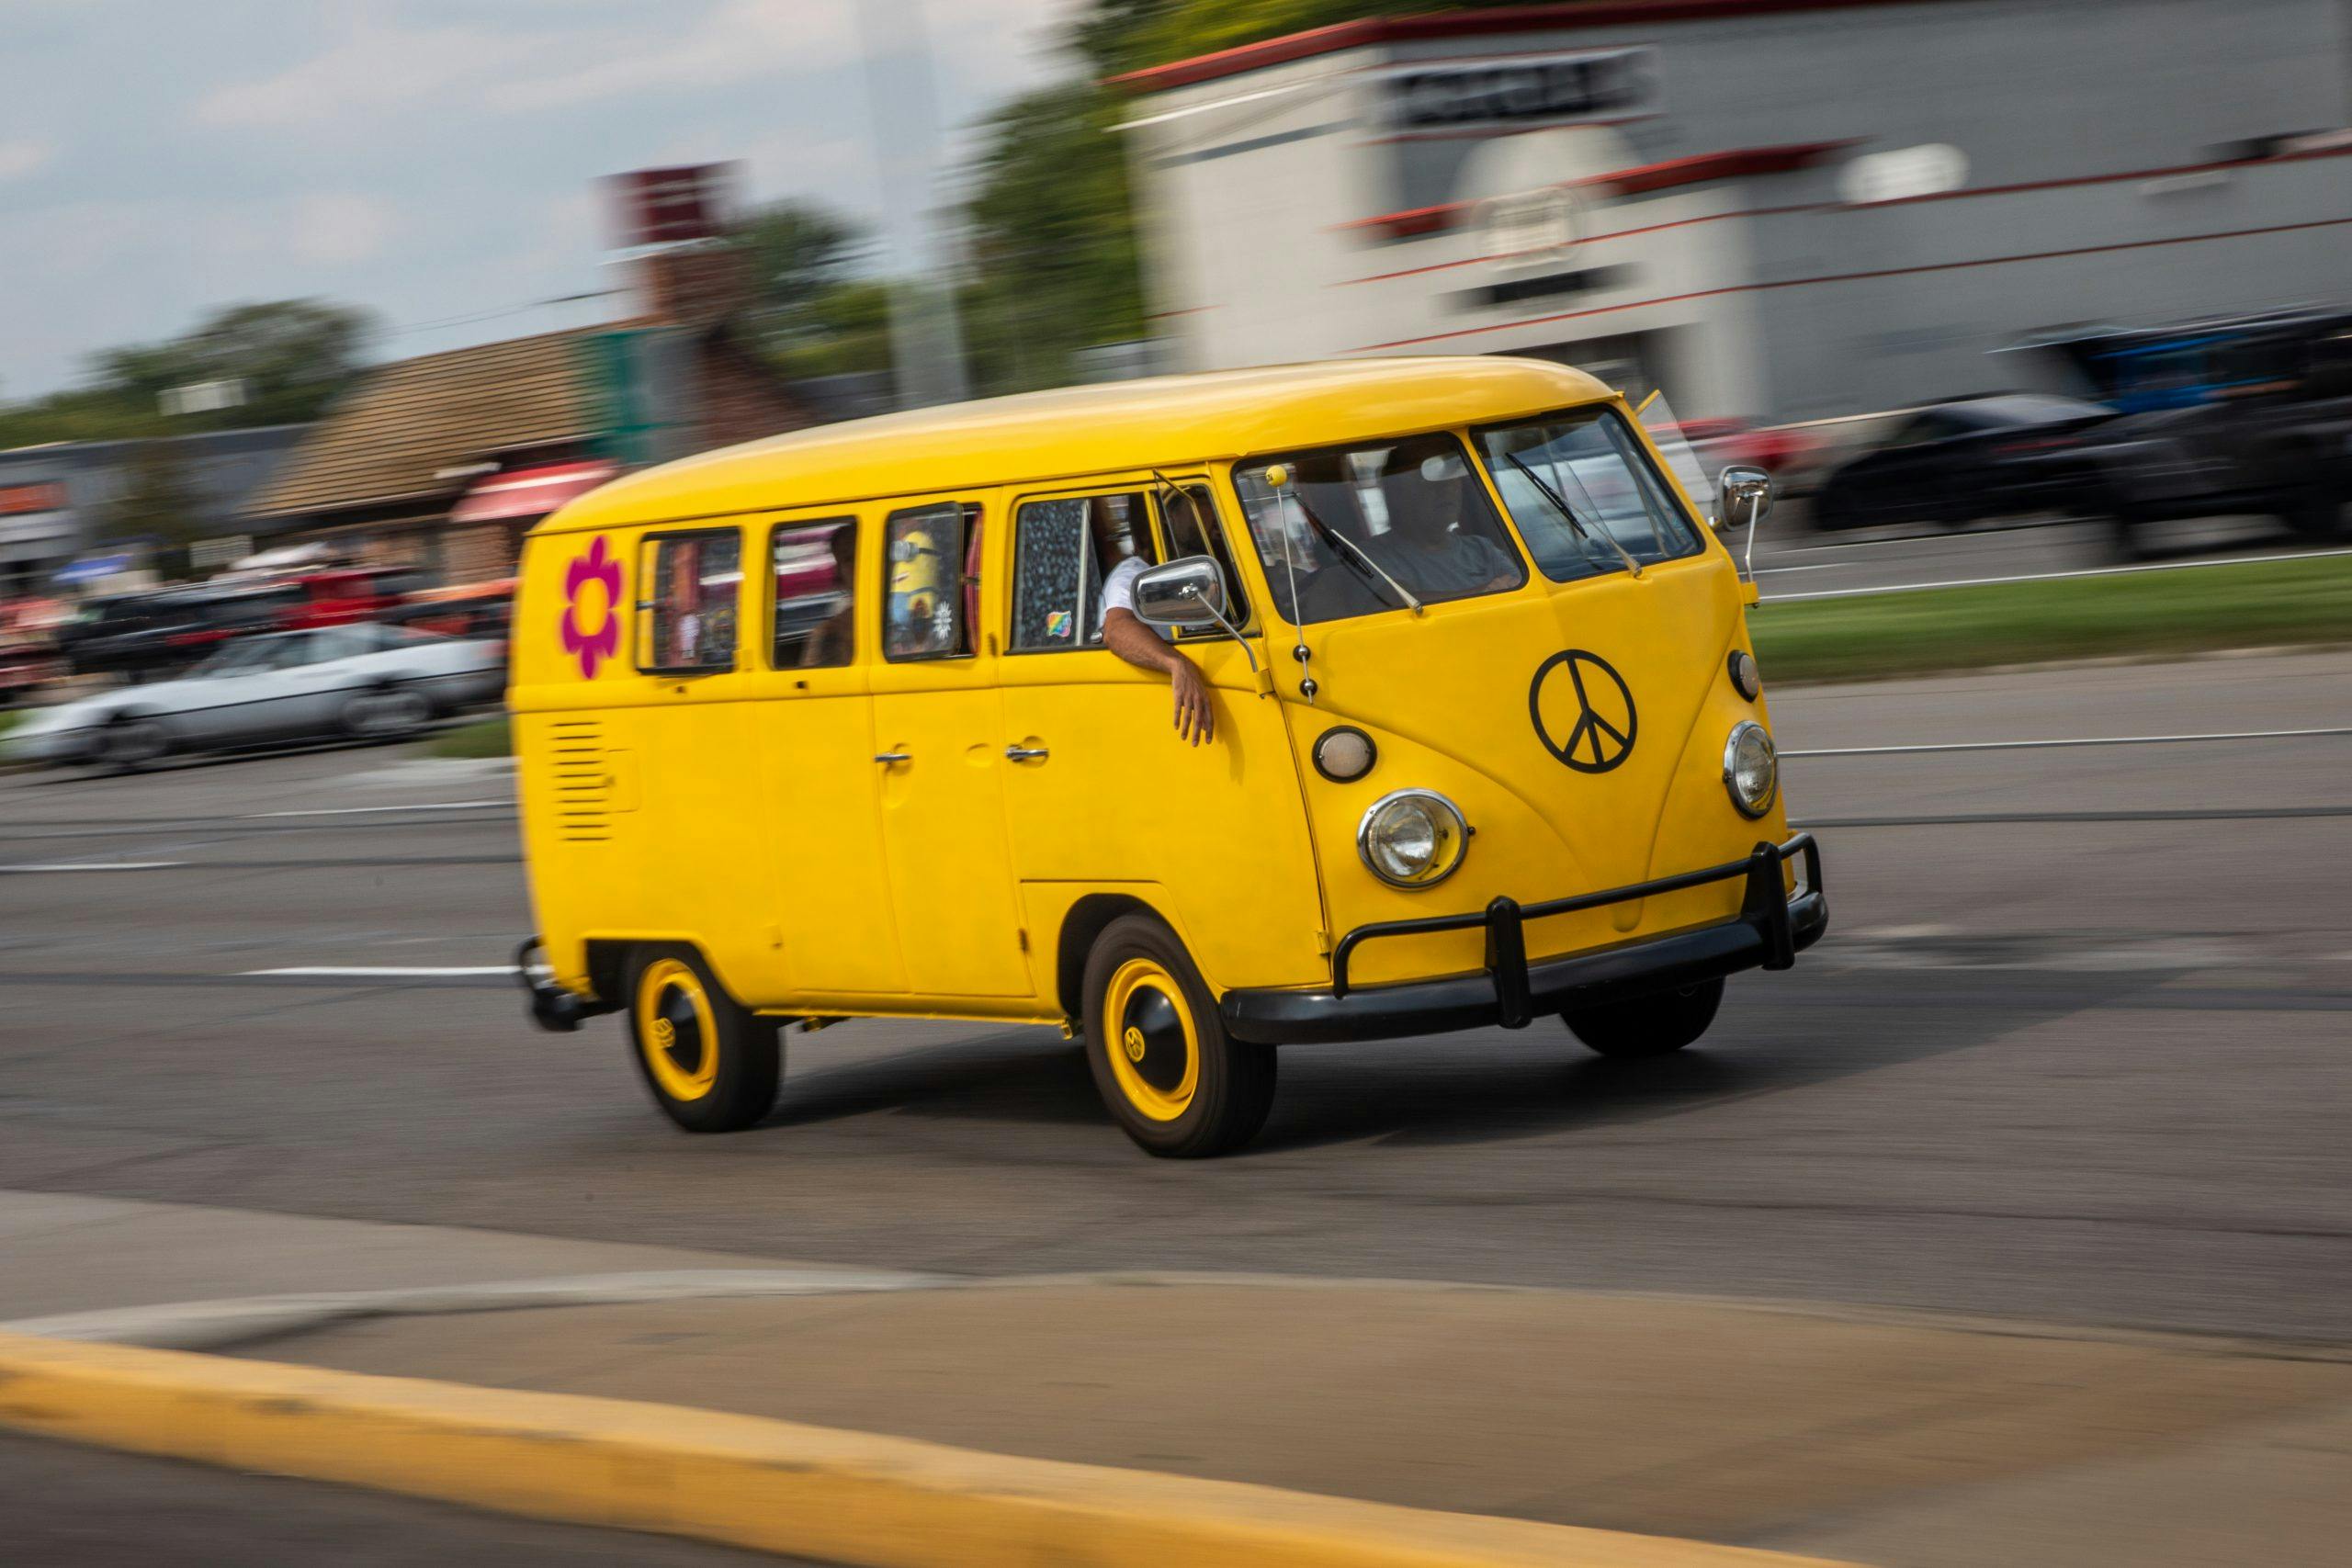 2021 Dream Cruise woodward ave action vw bus